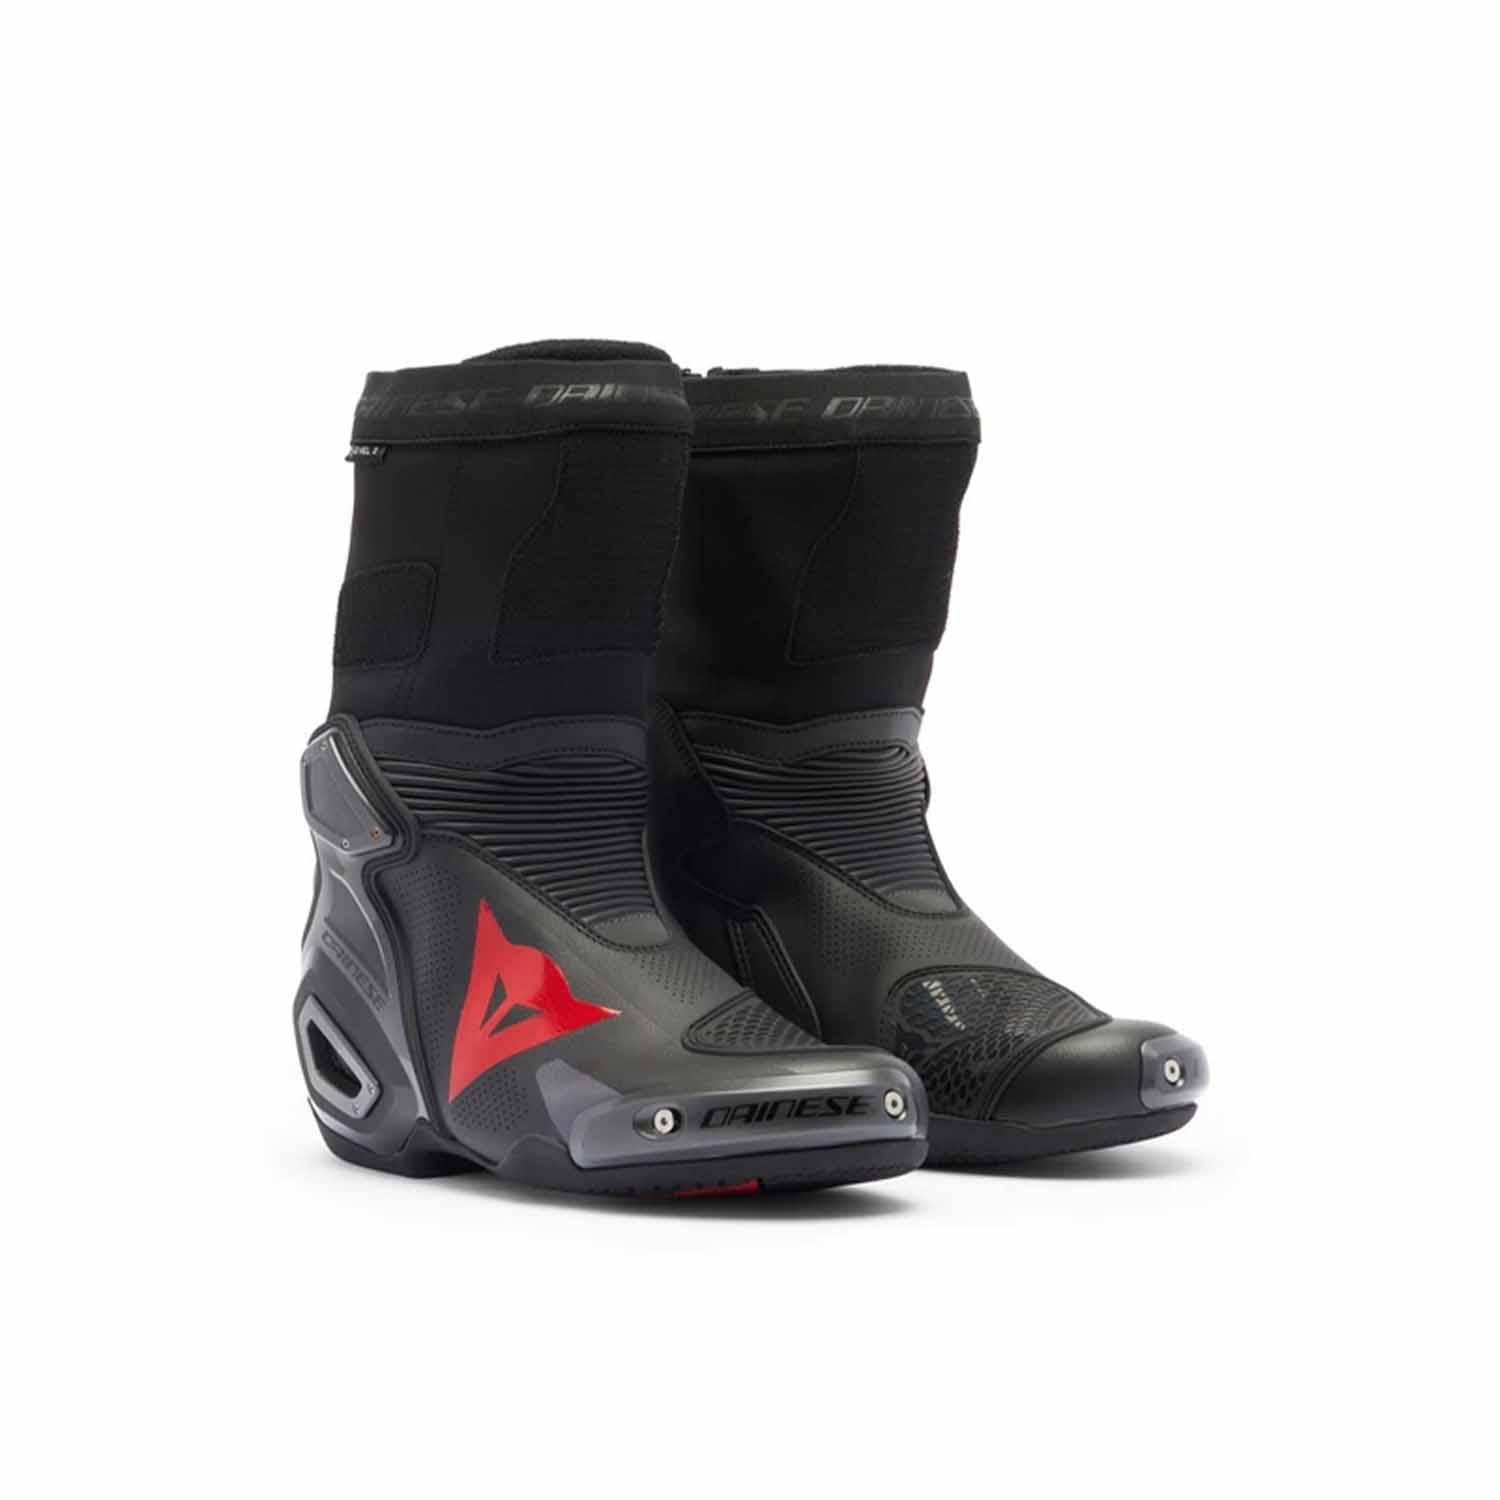 Image of Dainese Axial 2 Air Boots Black Black Red Fluo Taille 40